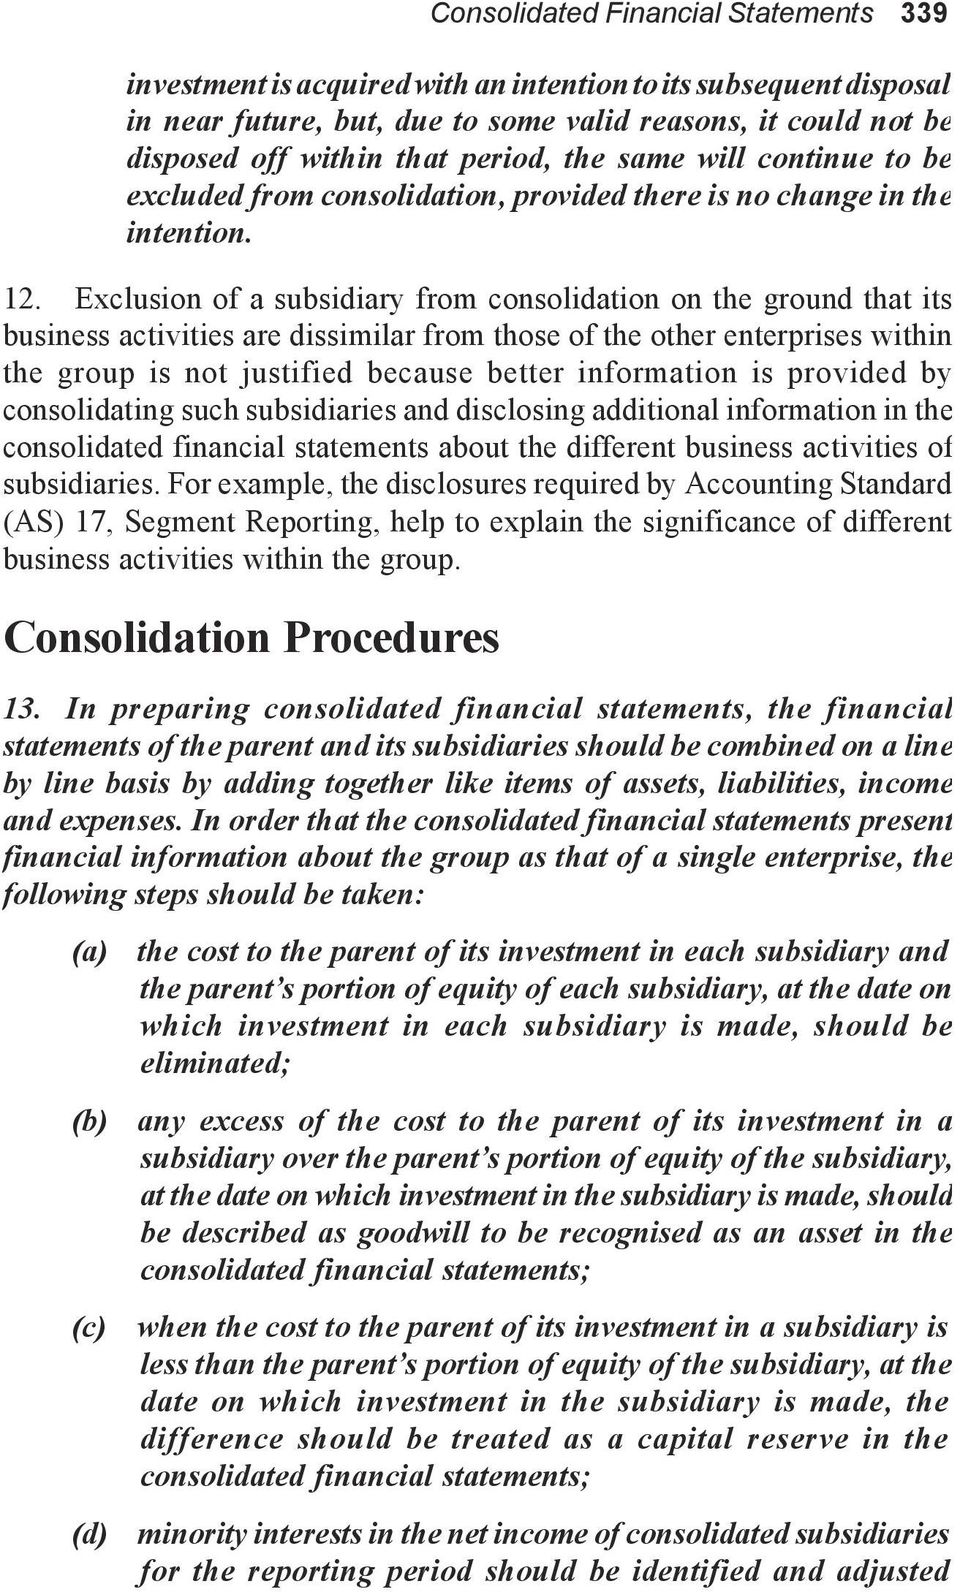 Exclusion of a subsidiary from consolidation on the ground that its business activities are dissimilar from those of the other enterprises within the group is not justified because better information